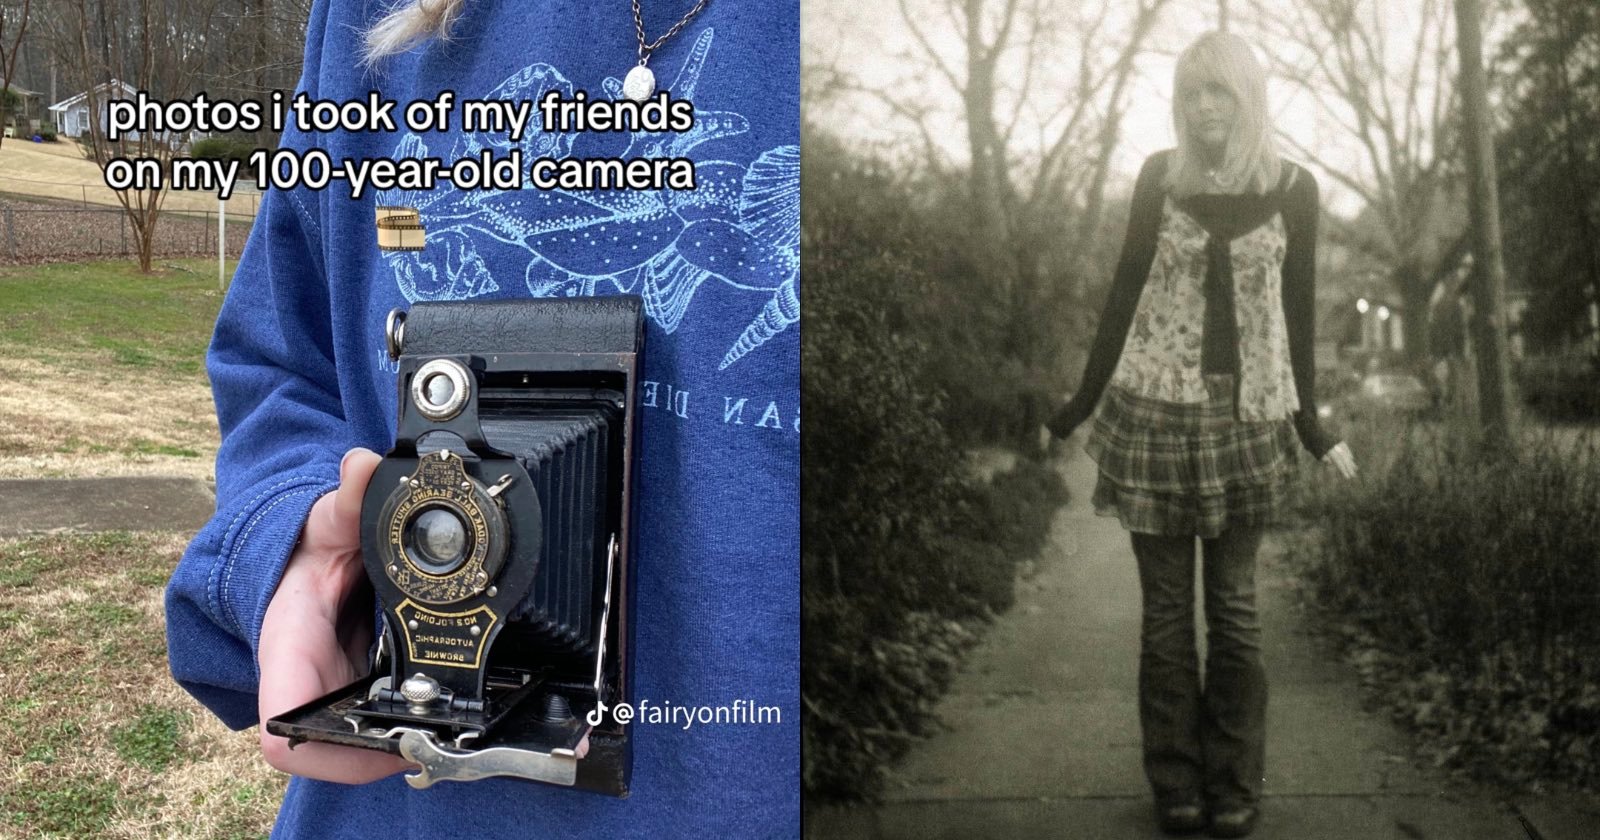  teen photographer shoots portraits her friends 100-year-old camera 